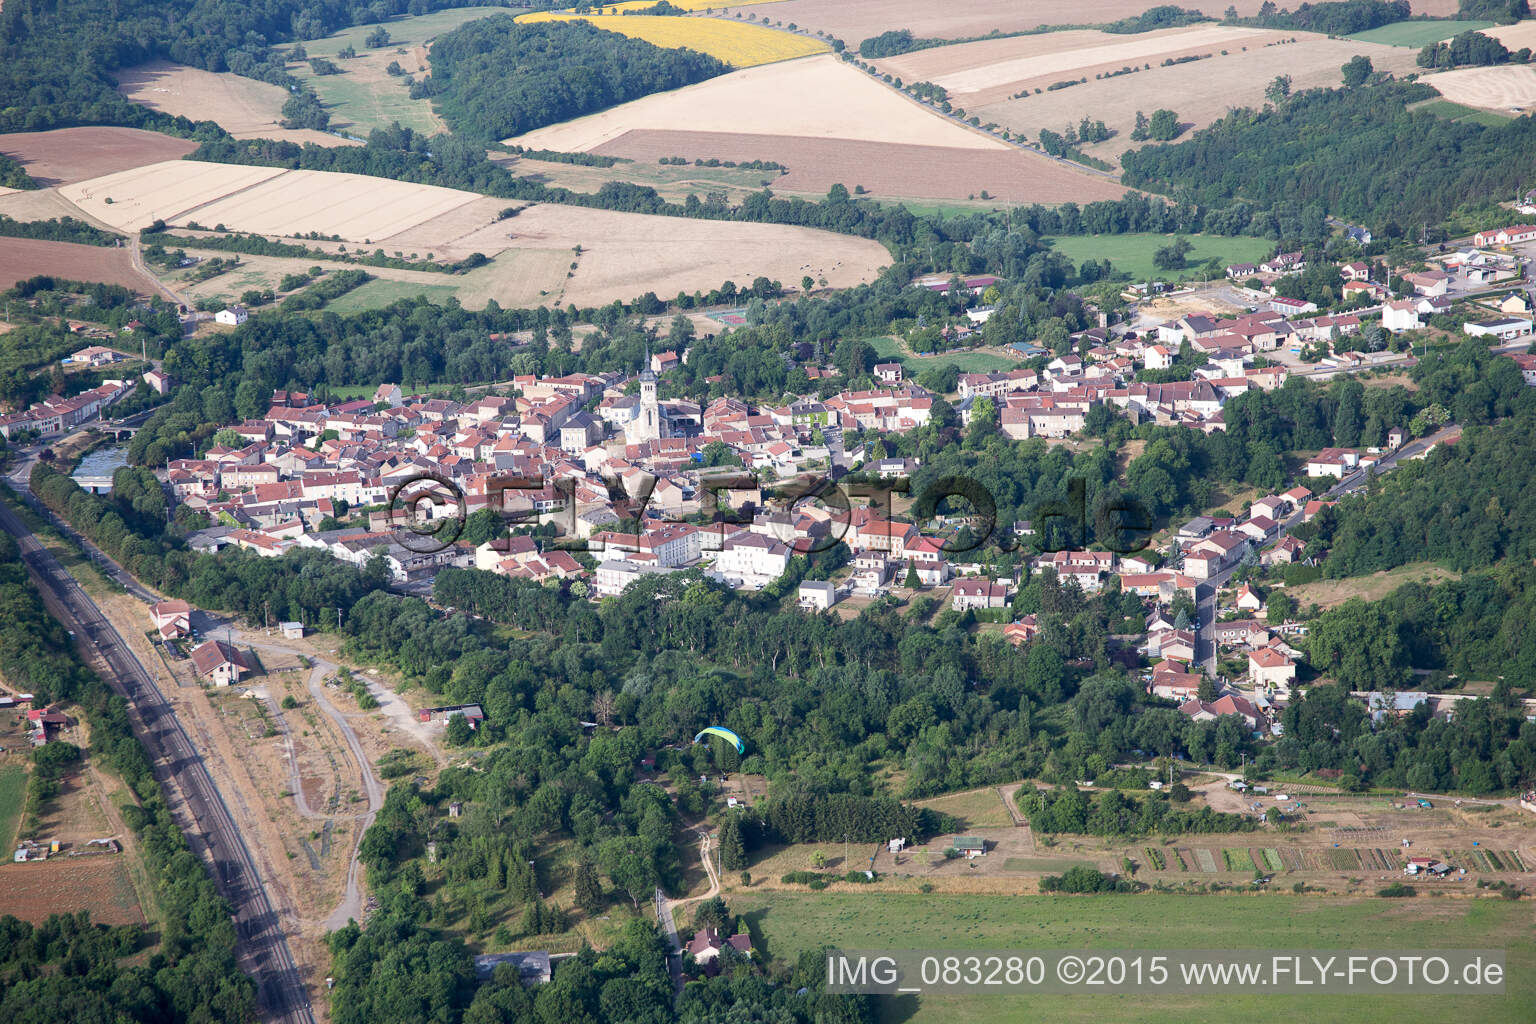 Aerial view of Village view in Thiaucourt-Regnieville in Grand Est, France